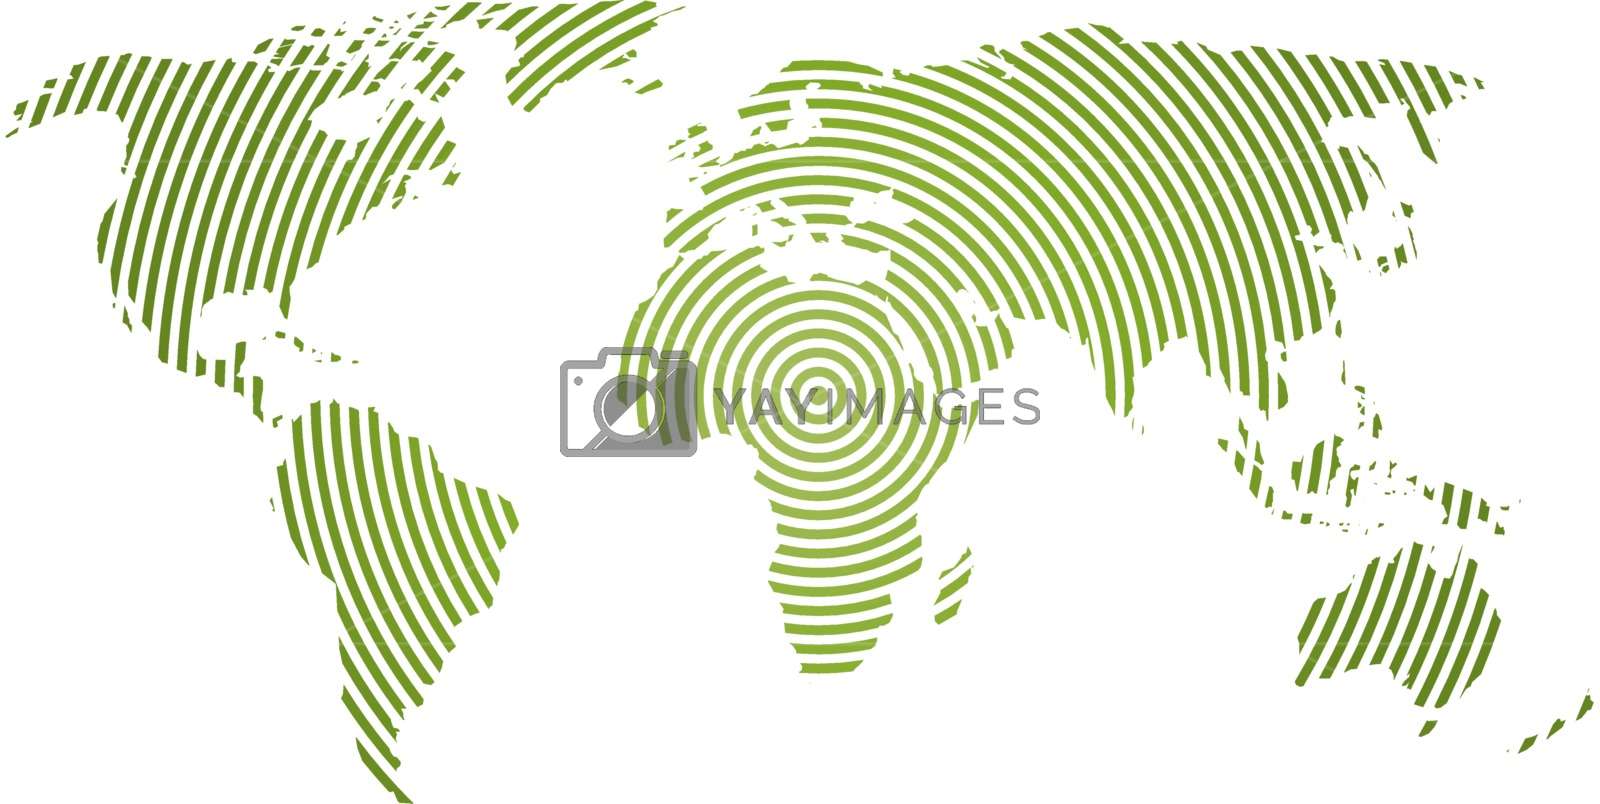 World Map Of Green Concentric Rings On White Background - South Africa And Egypt - HD Wallpaper 